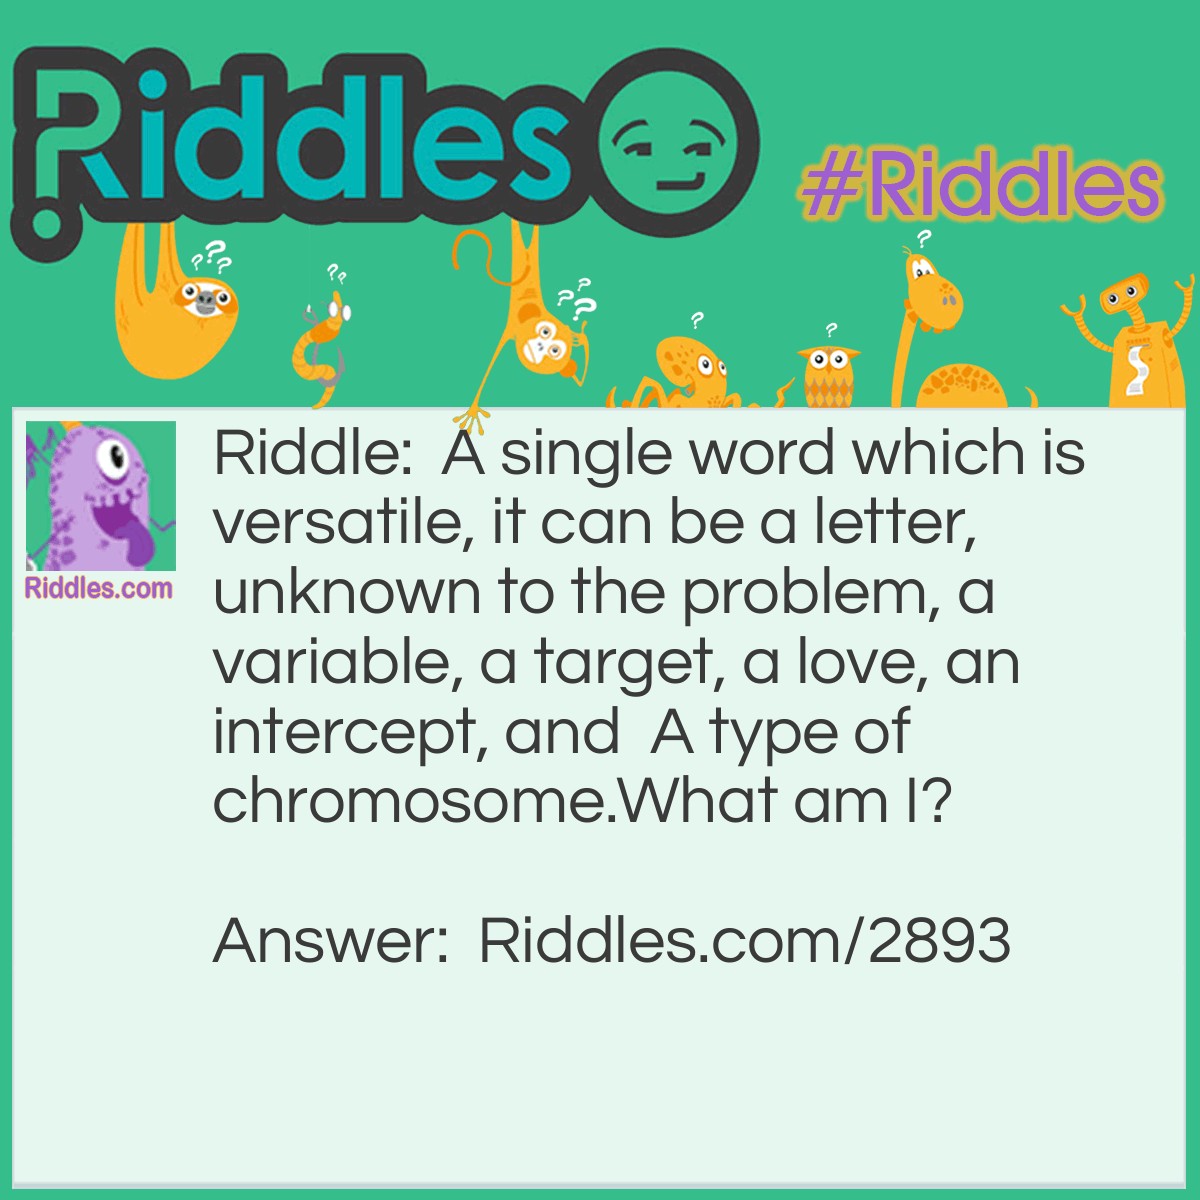 Riddle: A single word which is versatile, it can be a letter, unknown to the problem, a variable, a target, a love, an intercept, and a type of chromosome. What am I? Answer: X.